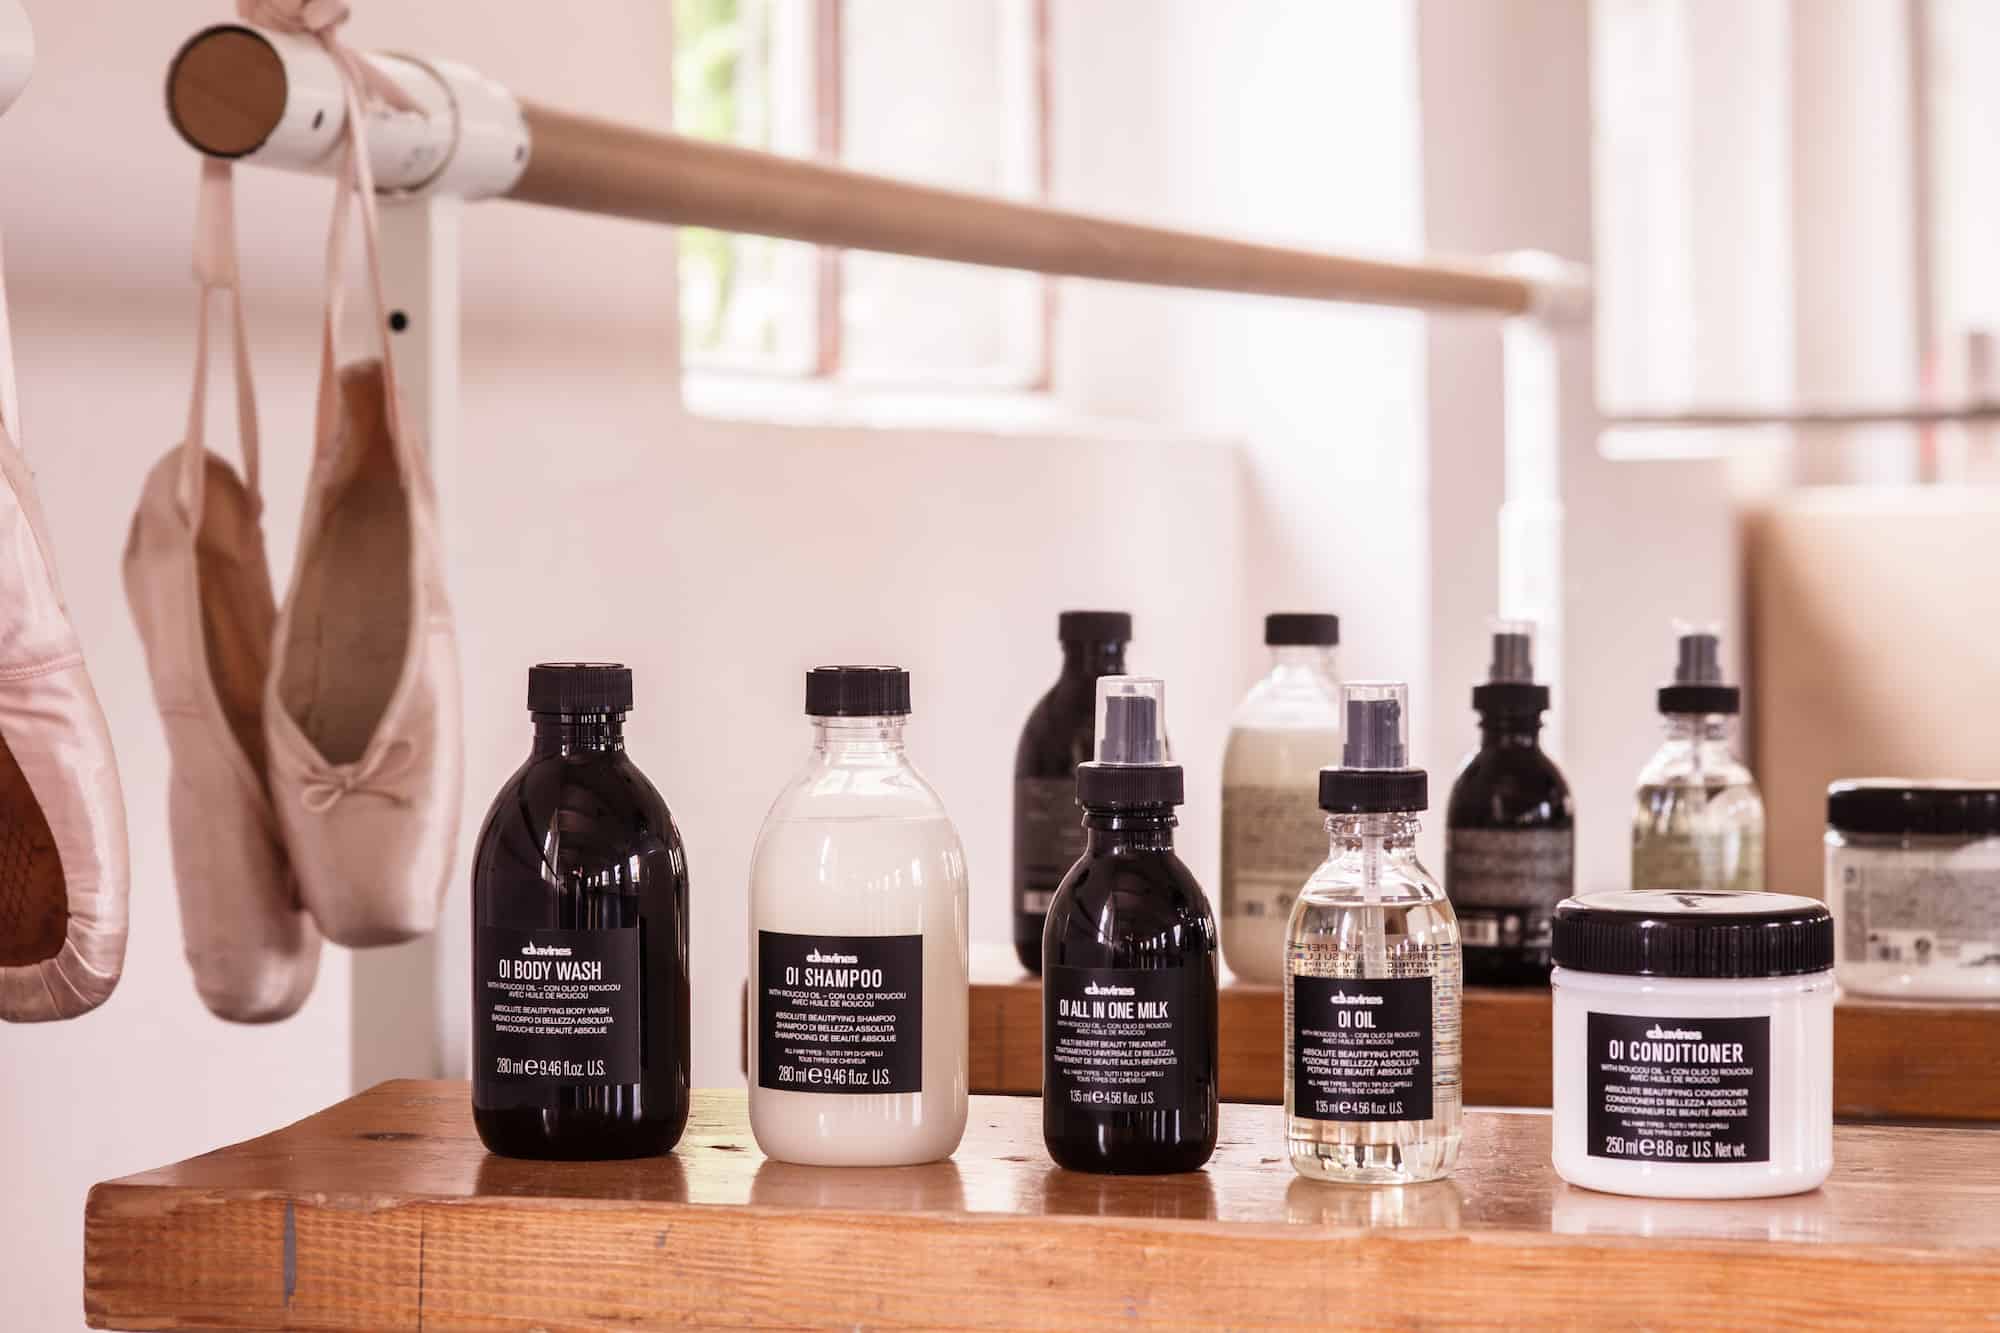 Skincare products from the Davines brand